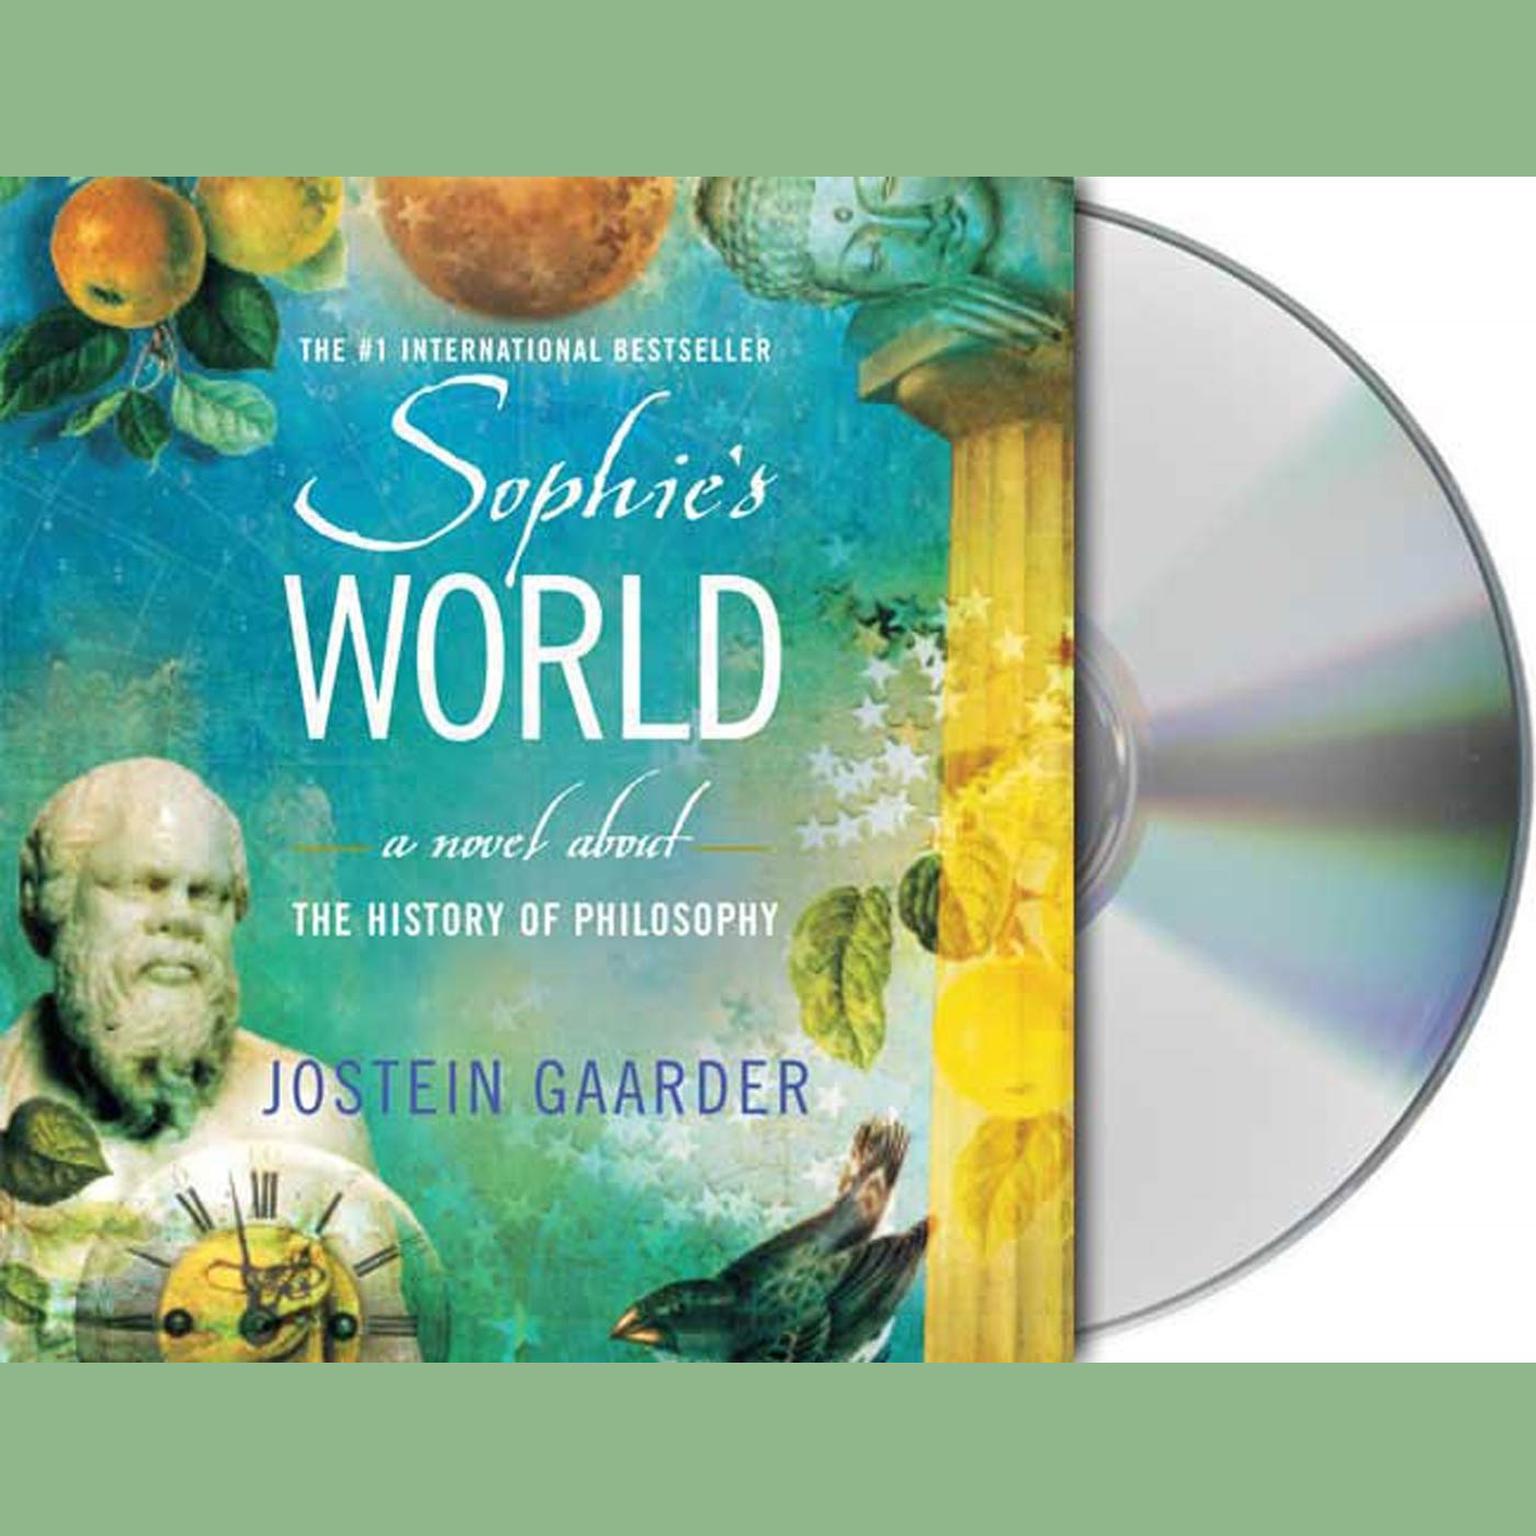 Sophies World: A Novel About the History of Philosophy Audiobook, by Jostein Gaarder